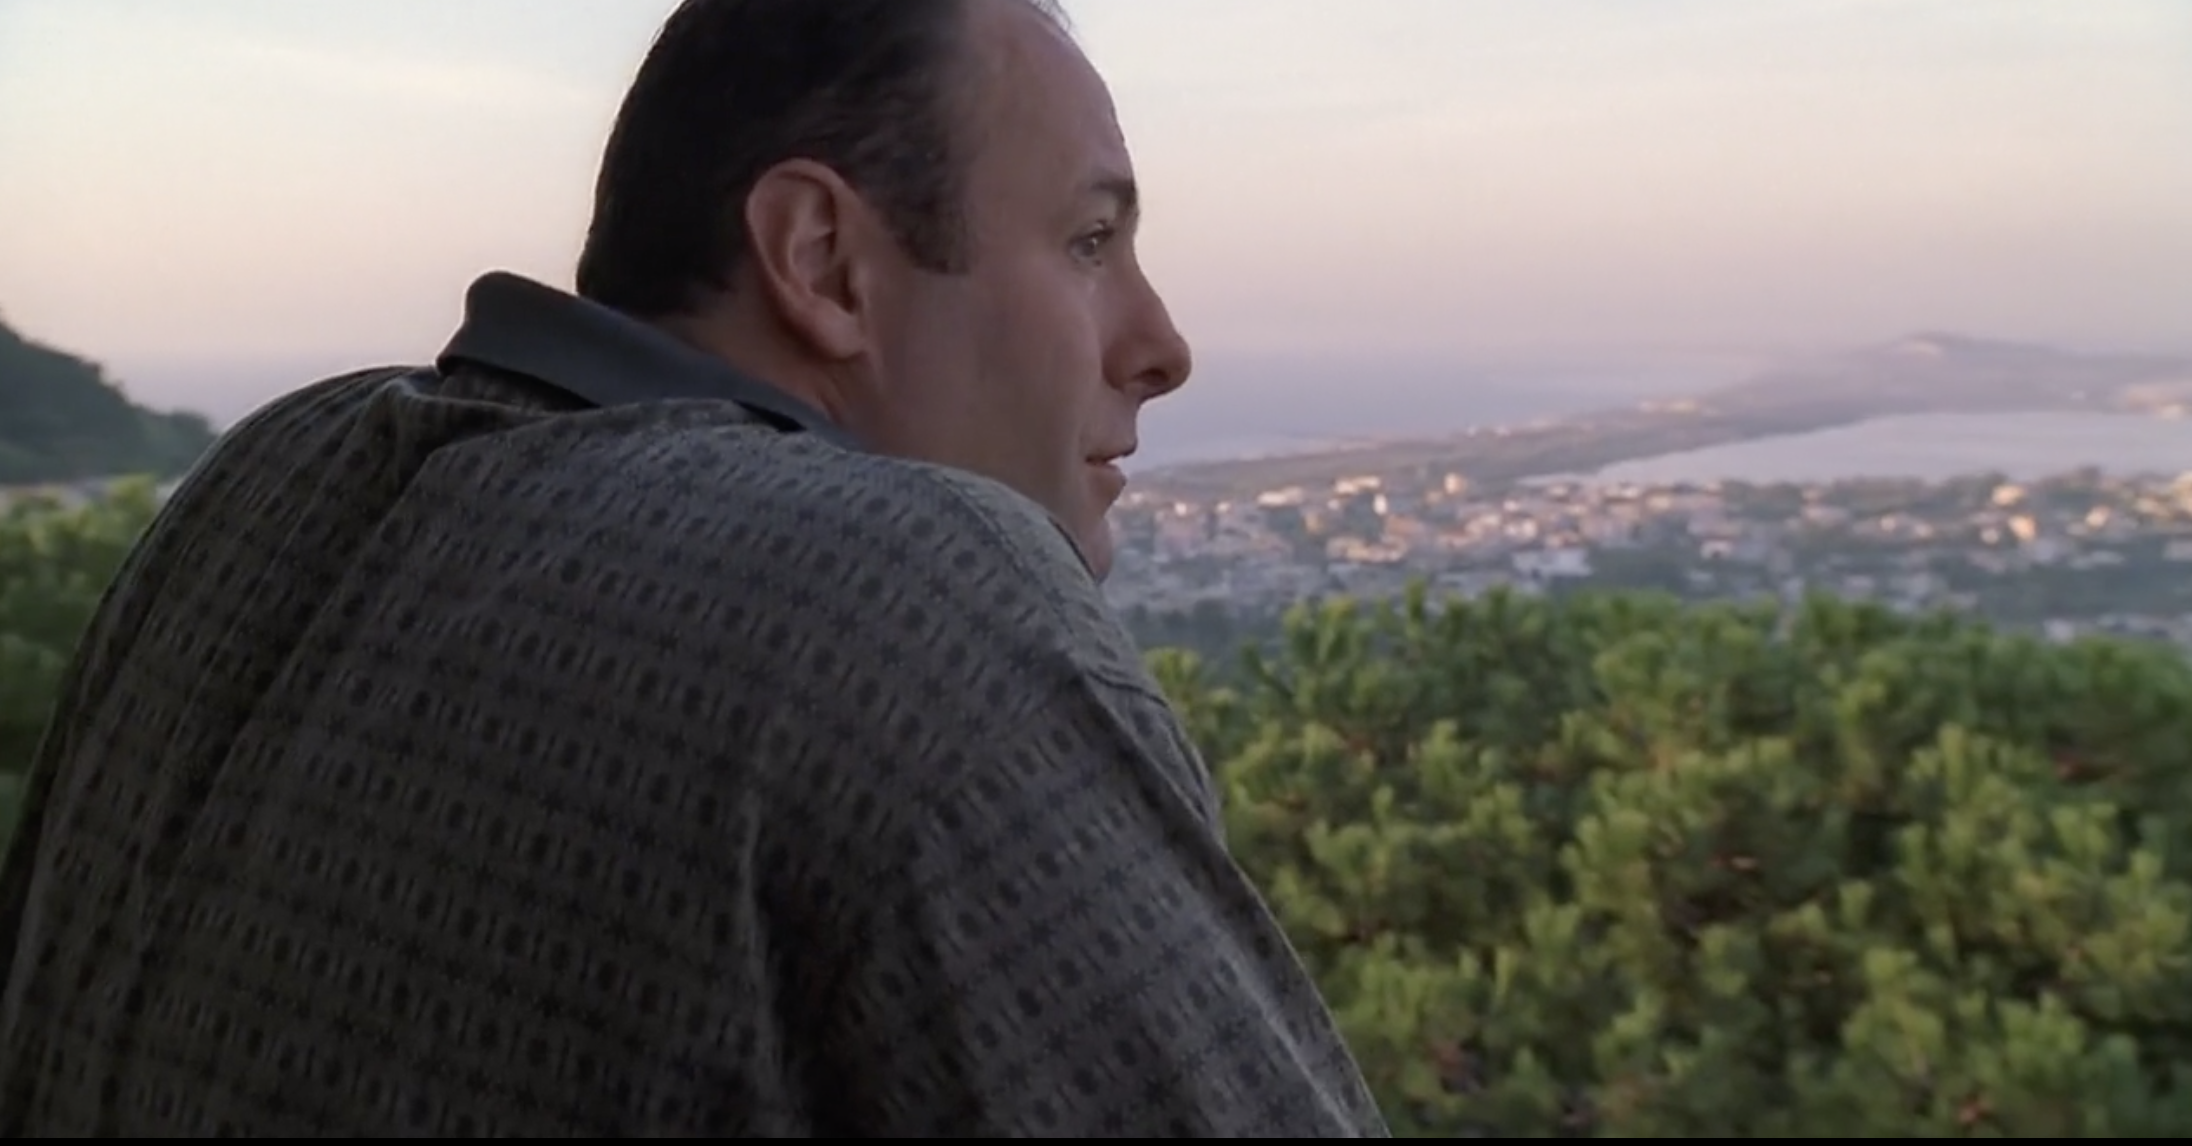 Image of Tony looking out over Procida Island. HBO/Entertainment image credit.